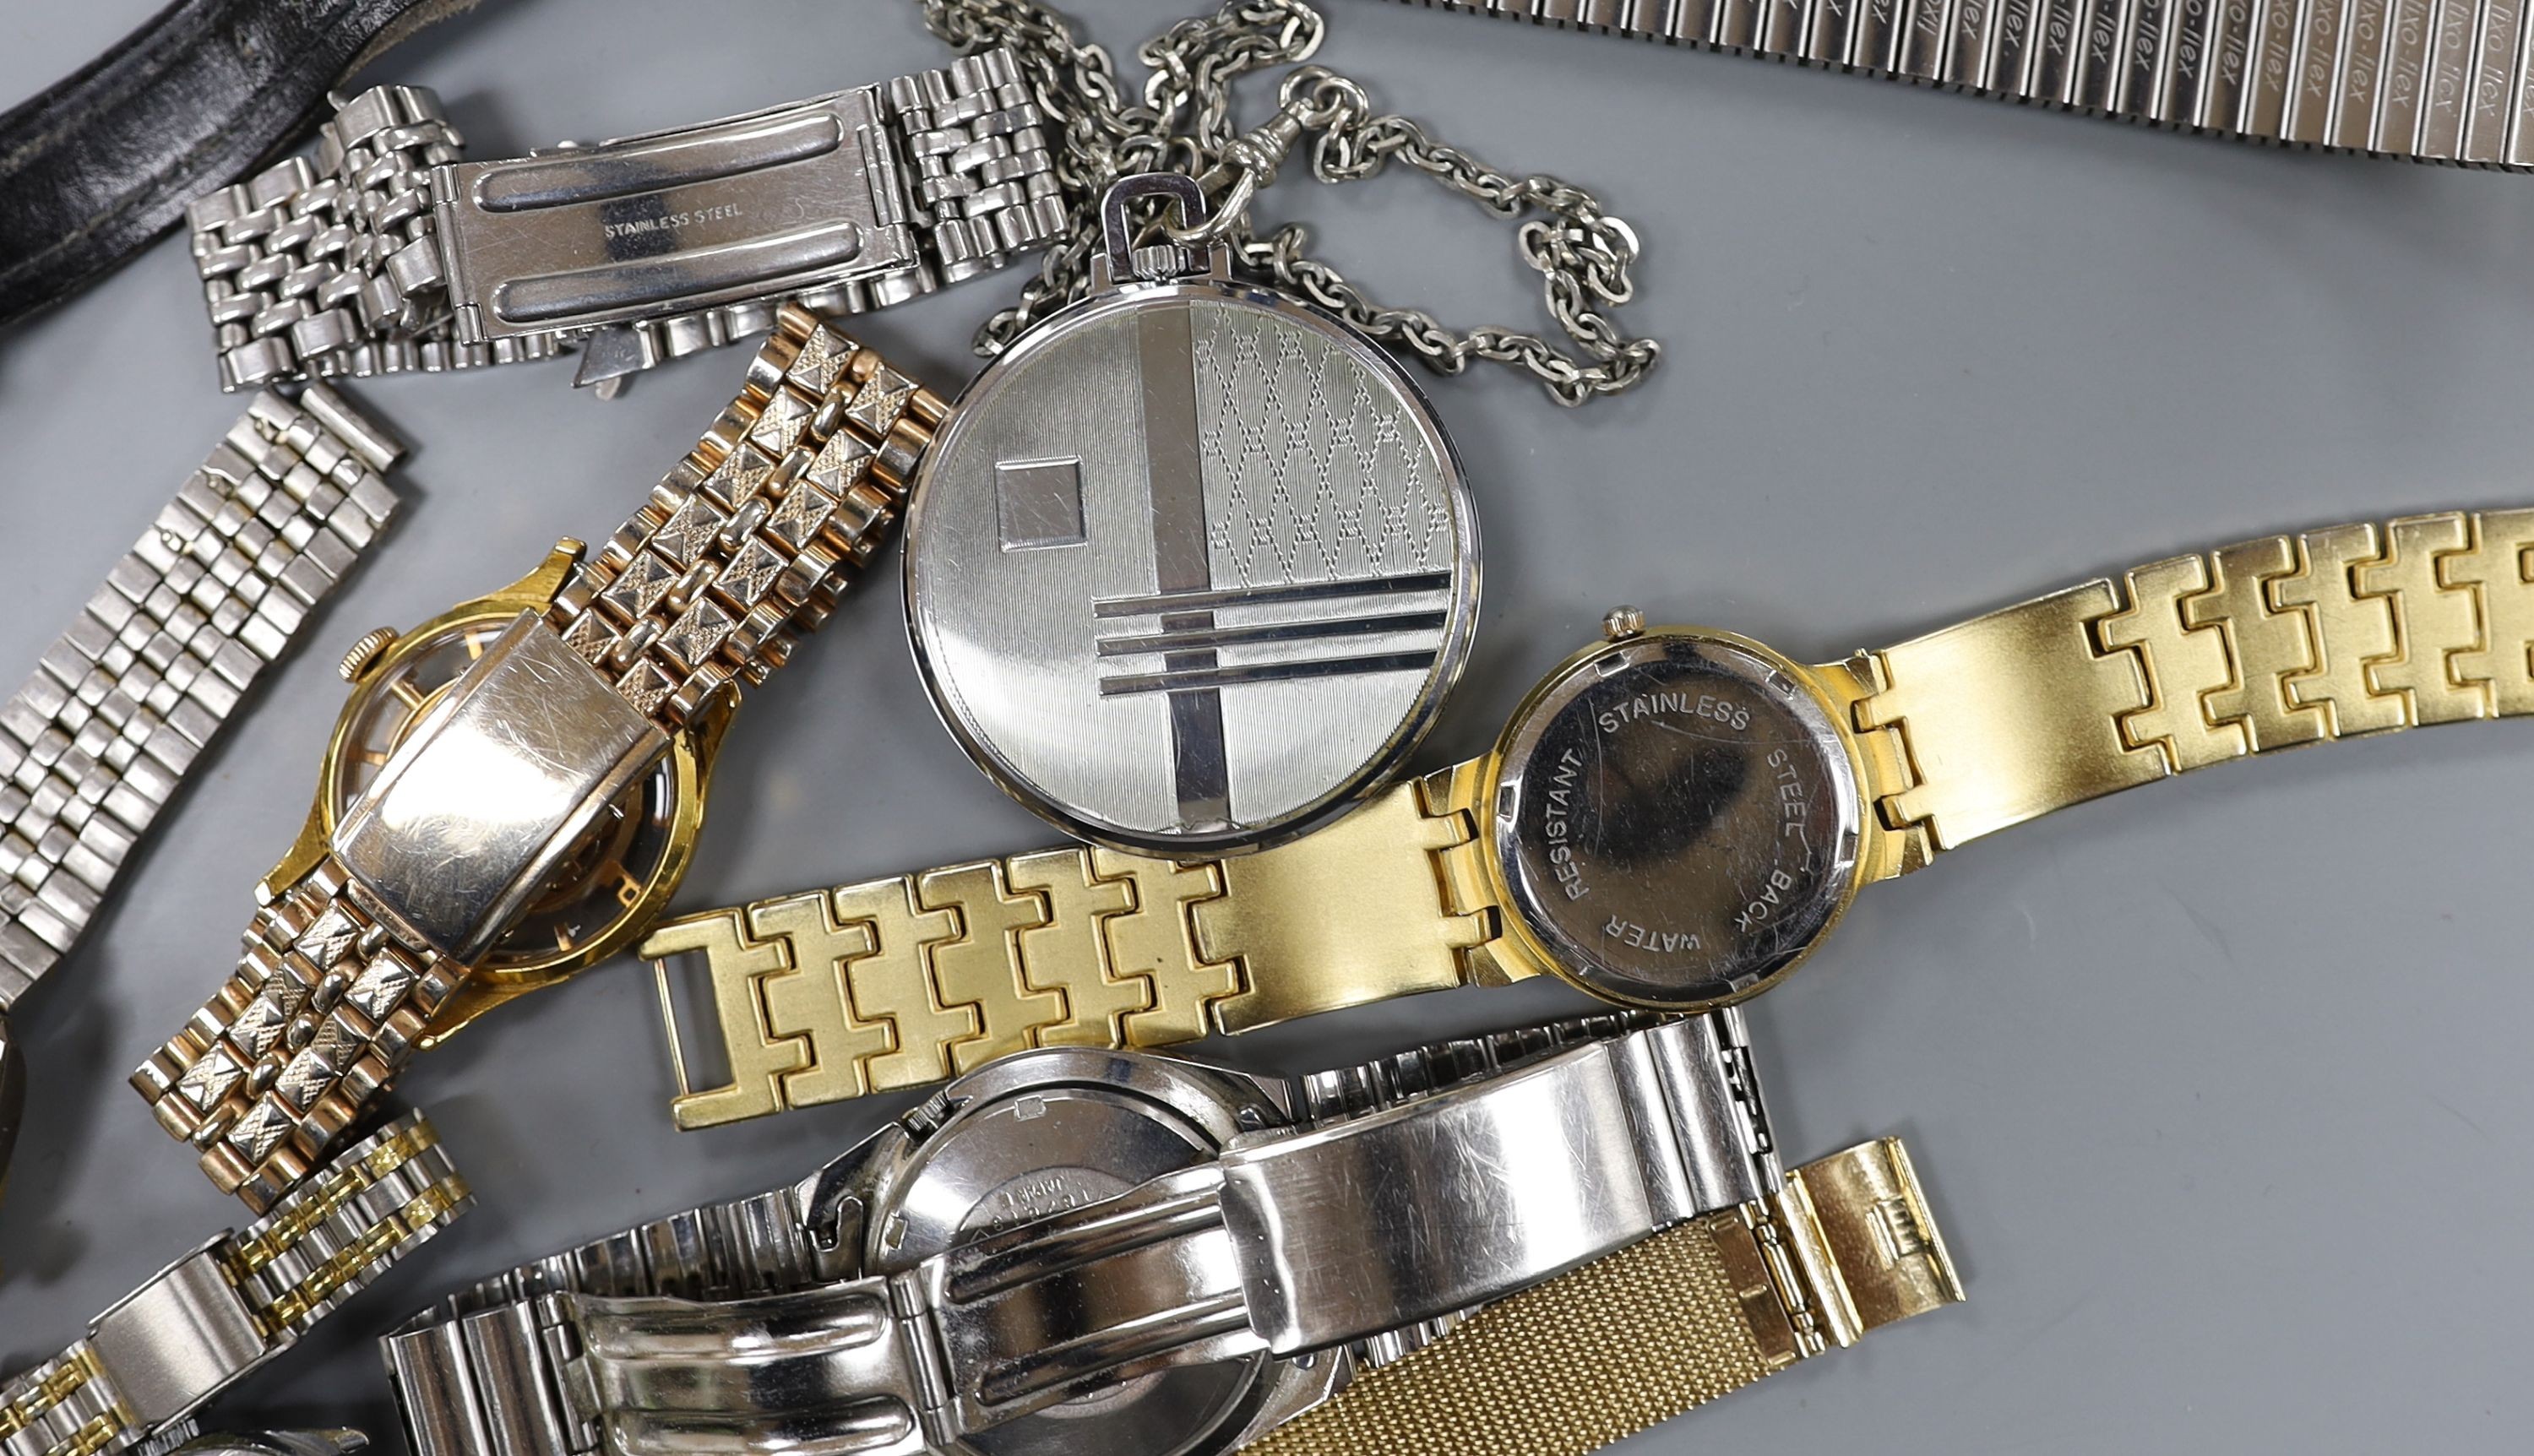 A gentleman's mid 20th century stainless steel Omega manual wrist watch, case diameter 35mm, on associated bracelet, together with eight other assorted wrist watches including Seiko and Silvan, an Oris pocket watch and t